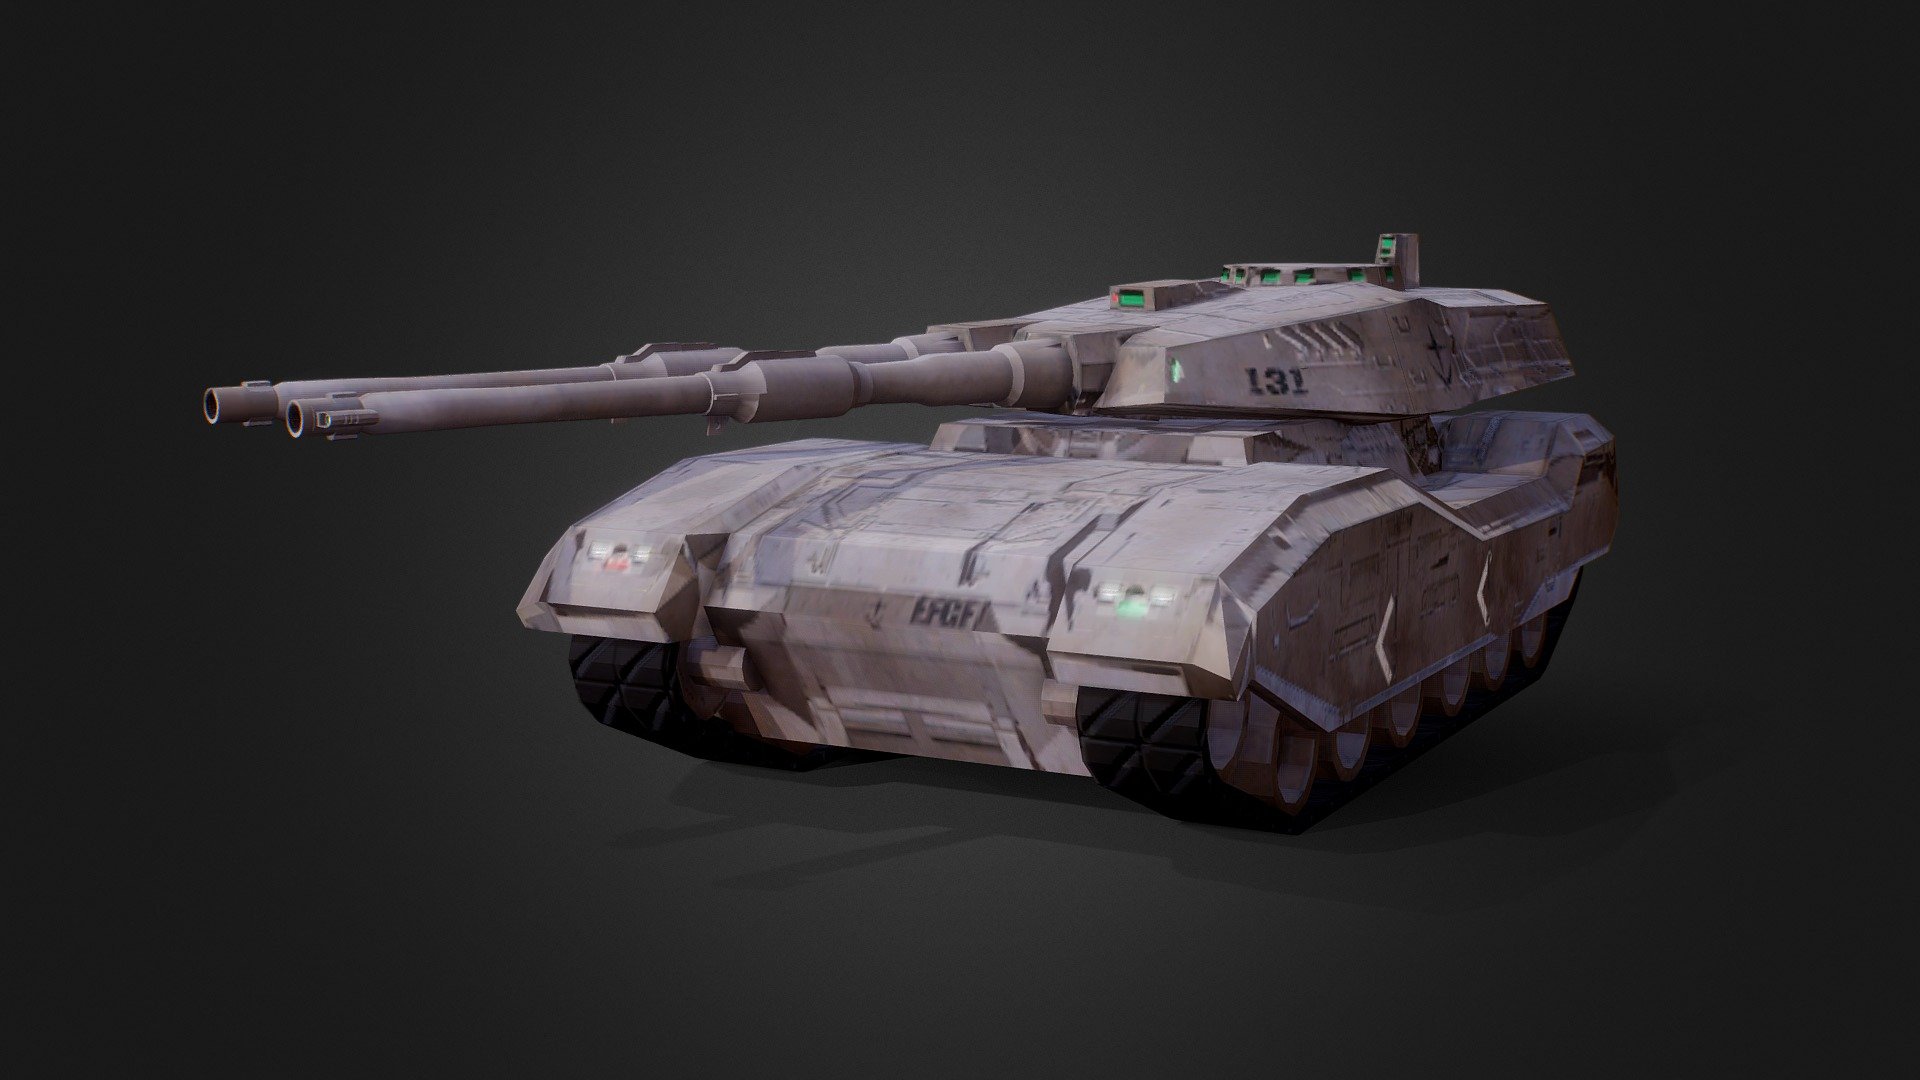 This model was made for One Year War mod of Hearts of Iron IV.

Our Mod Steam Home Page

https://steamcommunity.com/sharedfiles/filedetails/?id=2064985570 - Type-61 TANK - 3D model by One Year War Mod (@hoi4oneyearwar) 3d model